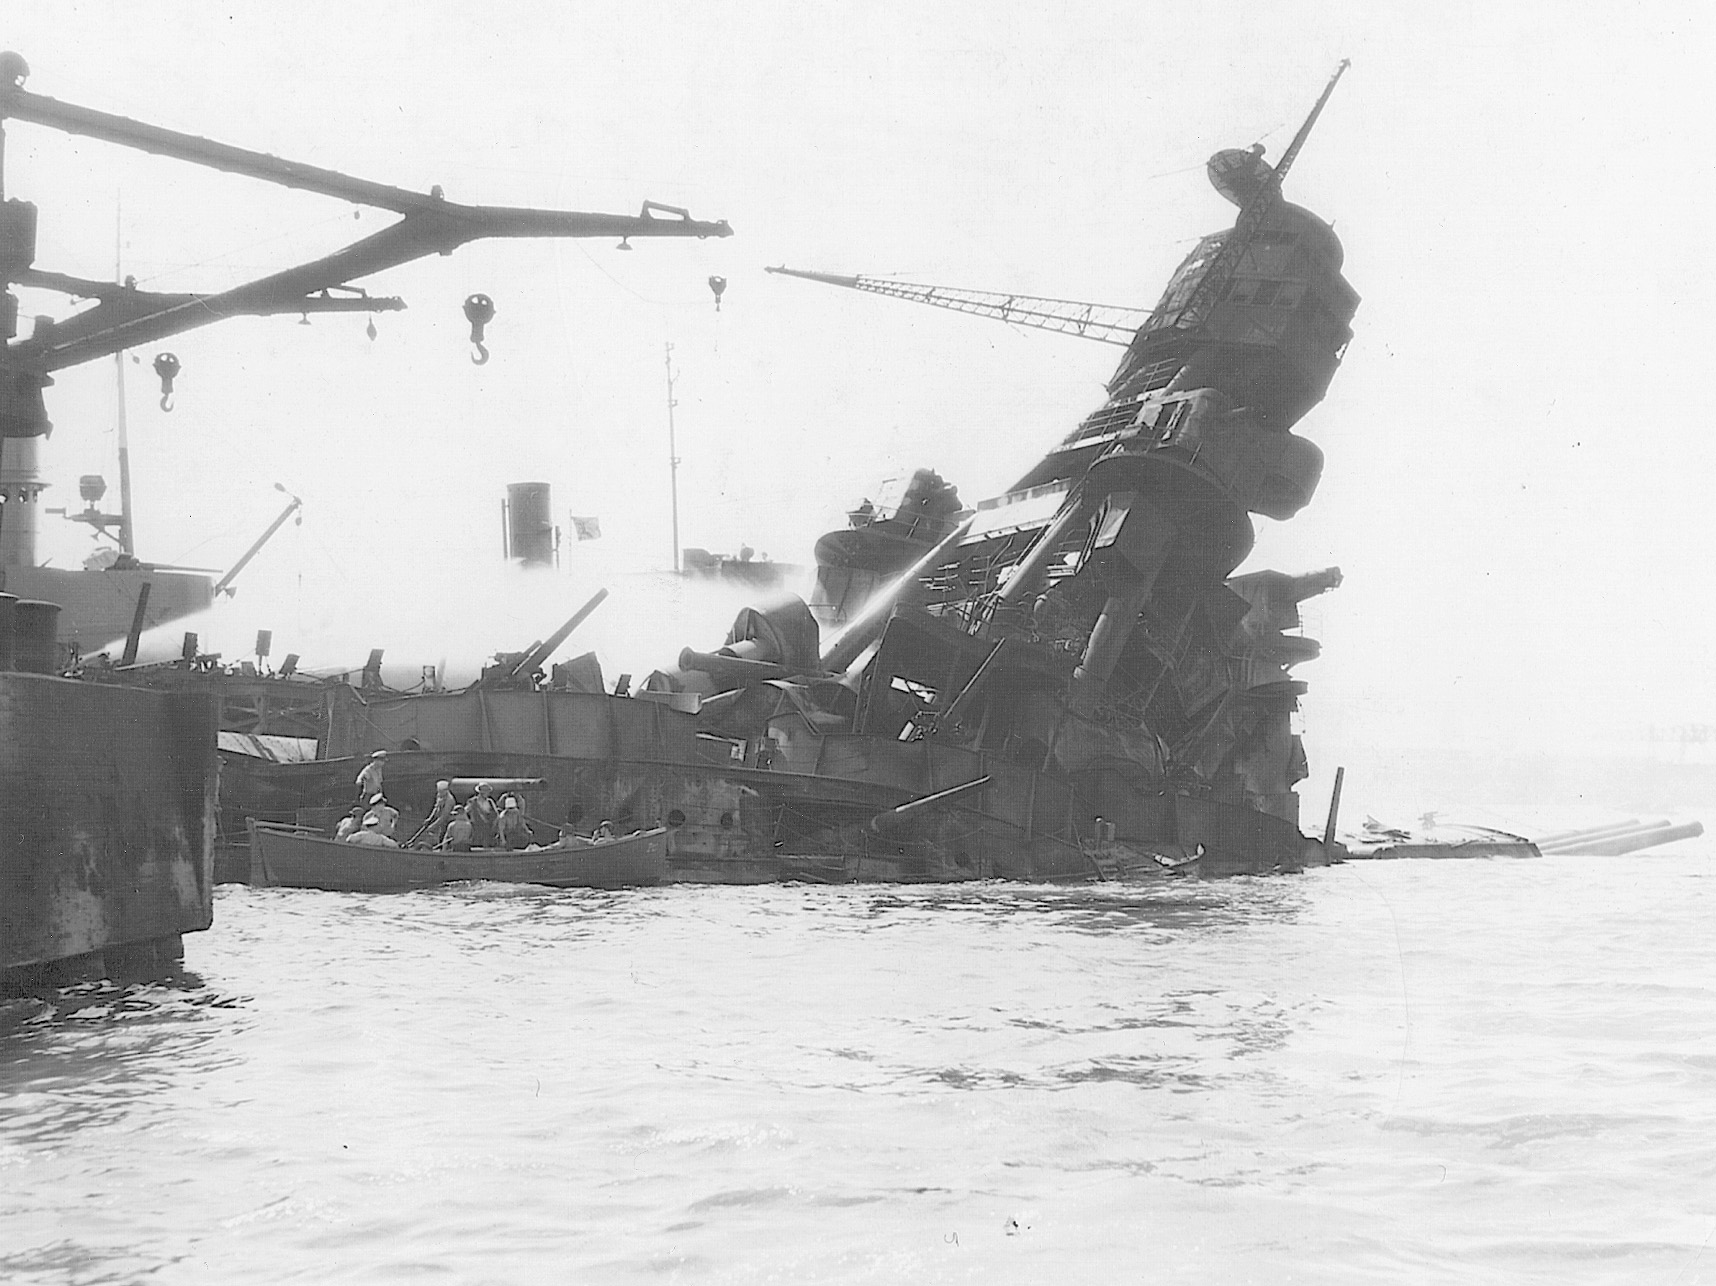 The twisted superstructure of the battleship Arizona shows the effects of the giant blast that killed more that 1,100 members of her crew.